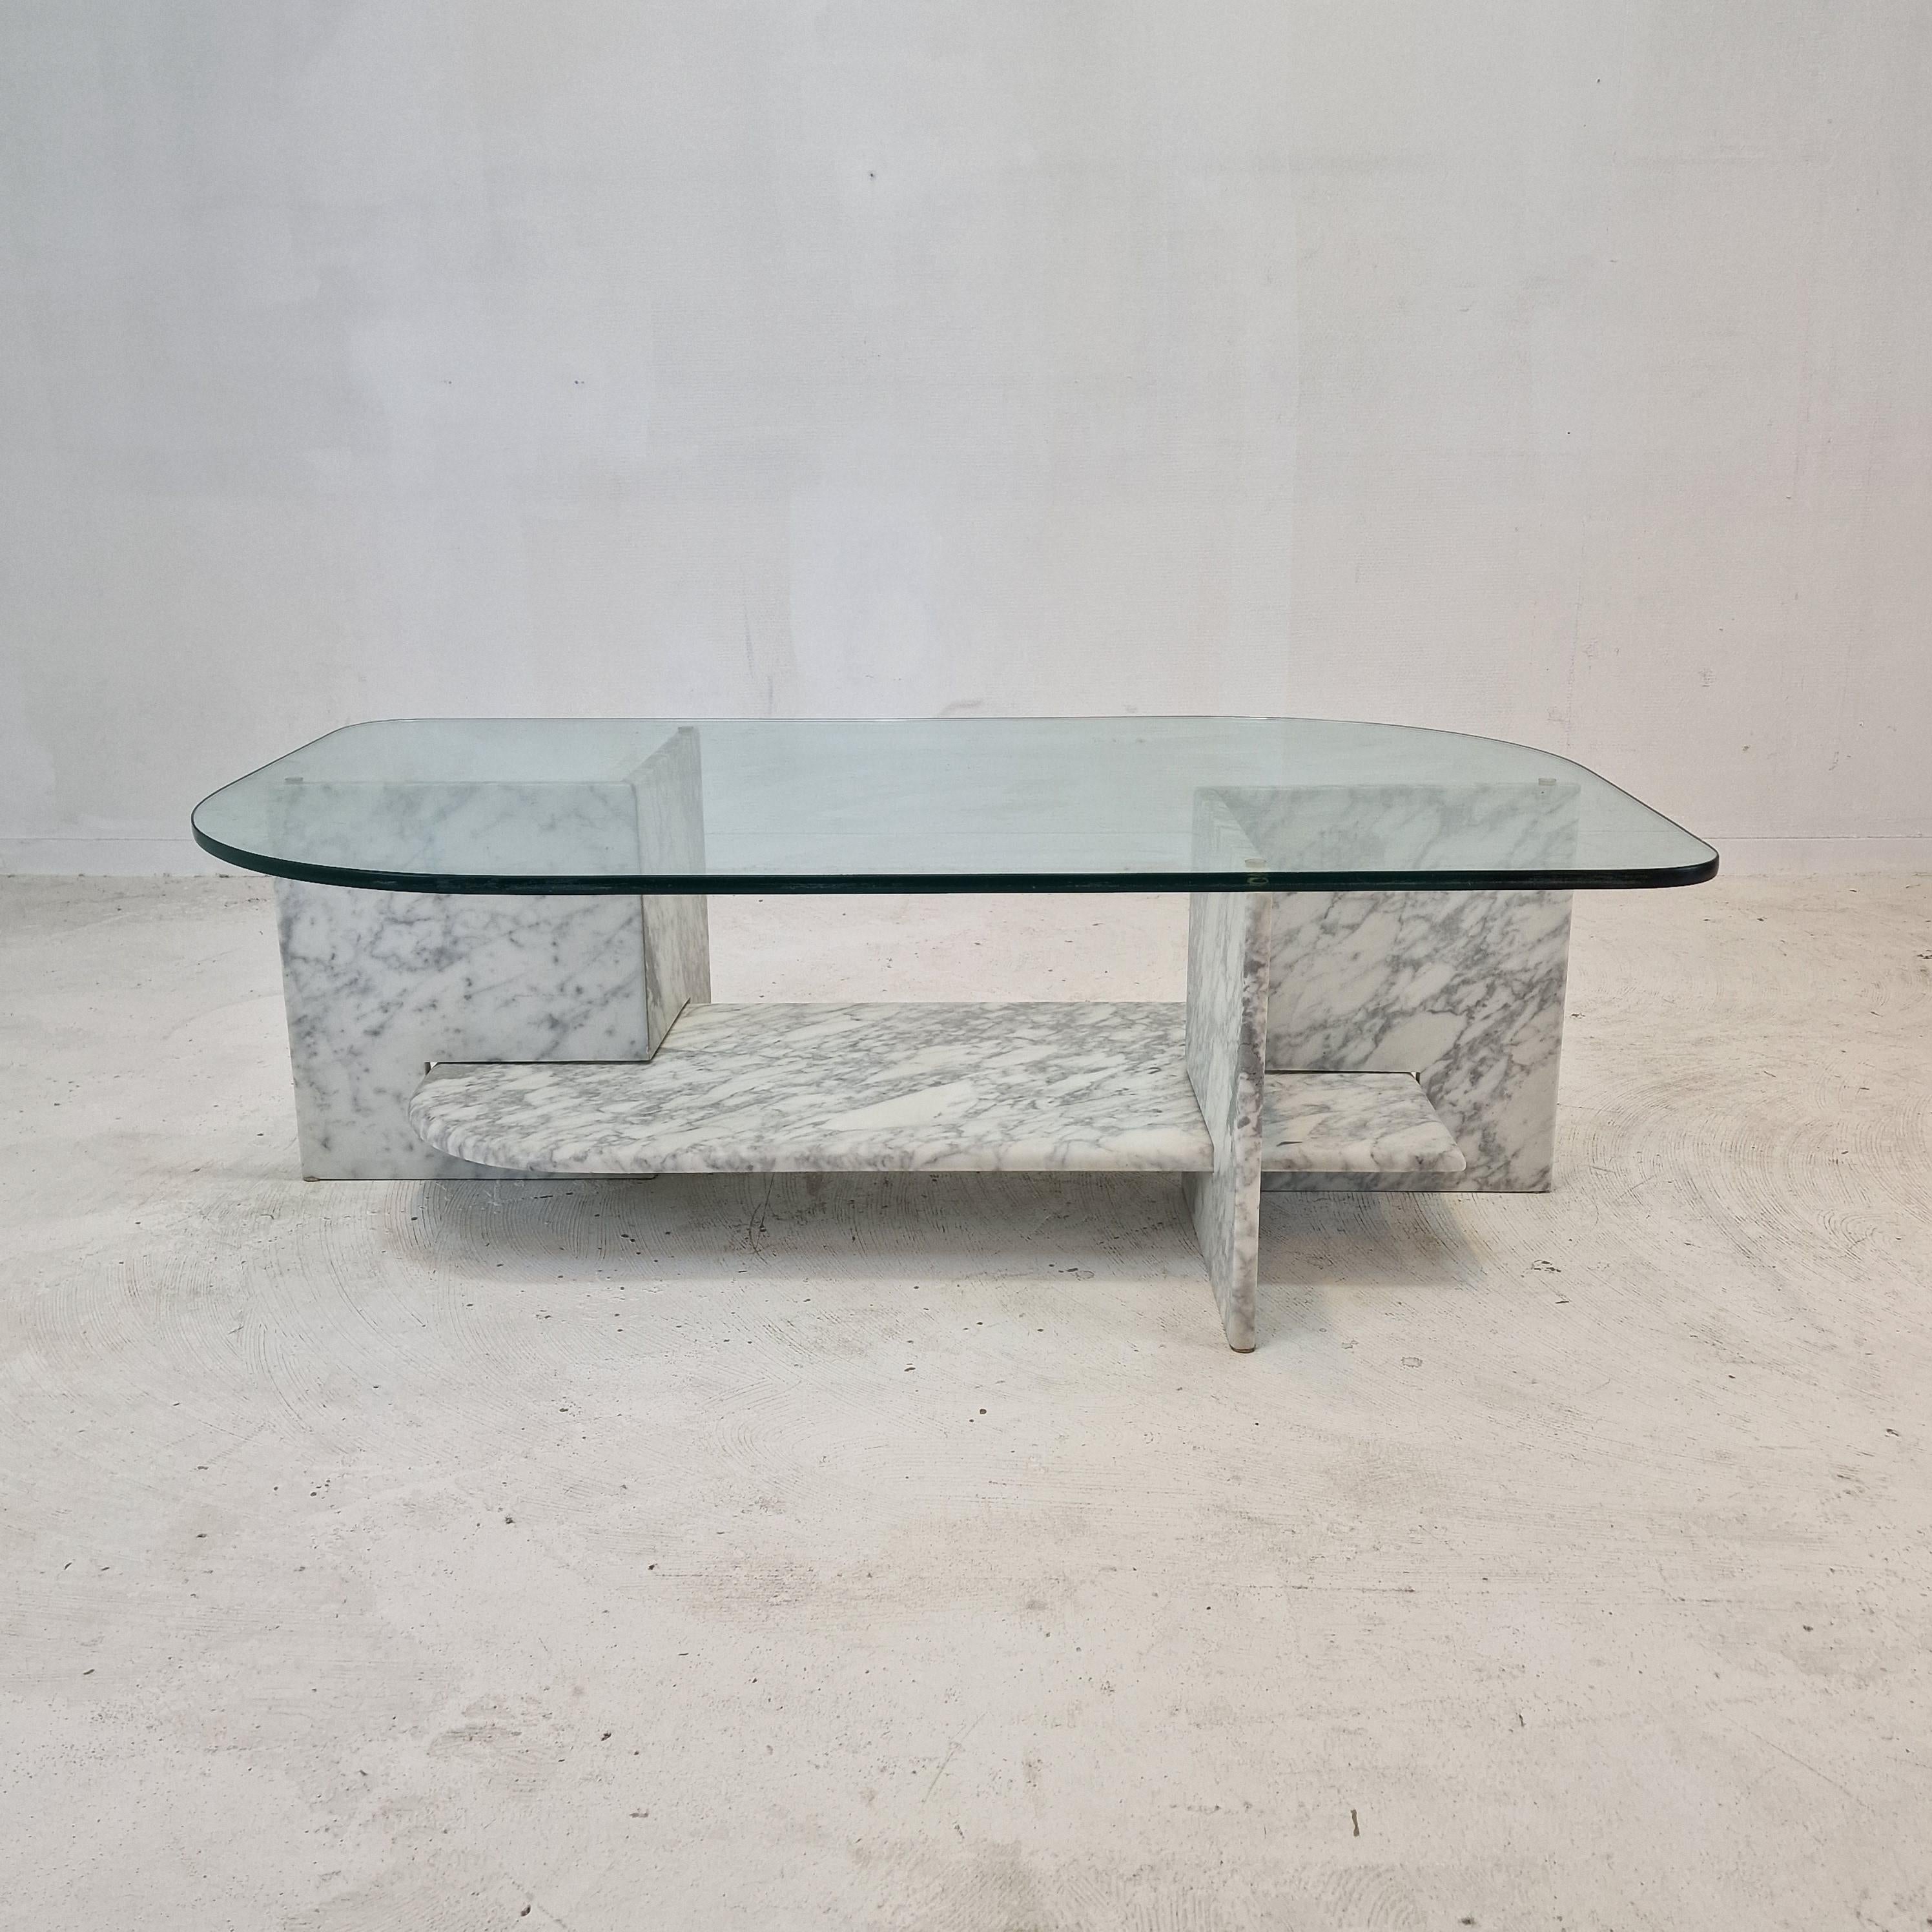 Stunning Italian coffee table handcrafted out of marble and glass, 1980s.

The rectangle plate and the two feet are made of very beautiful marble.
The fabulous marble features a very nice pattern of different colors.
The top is made of